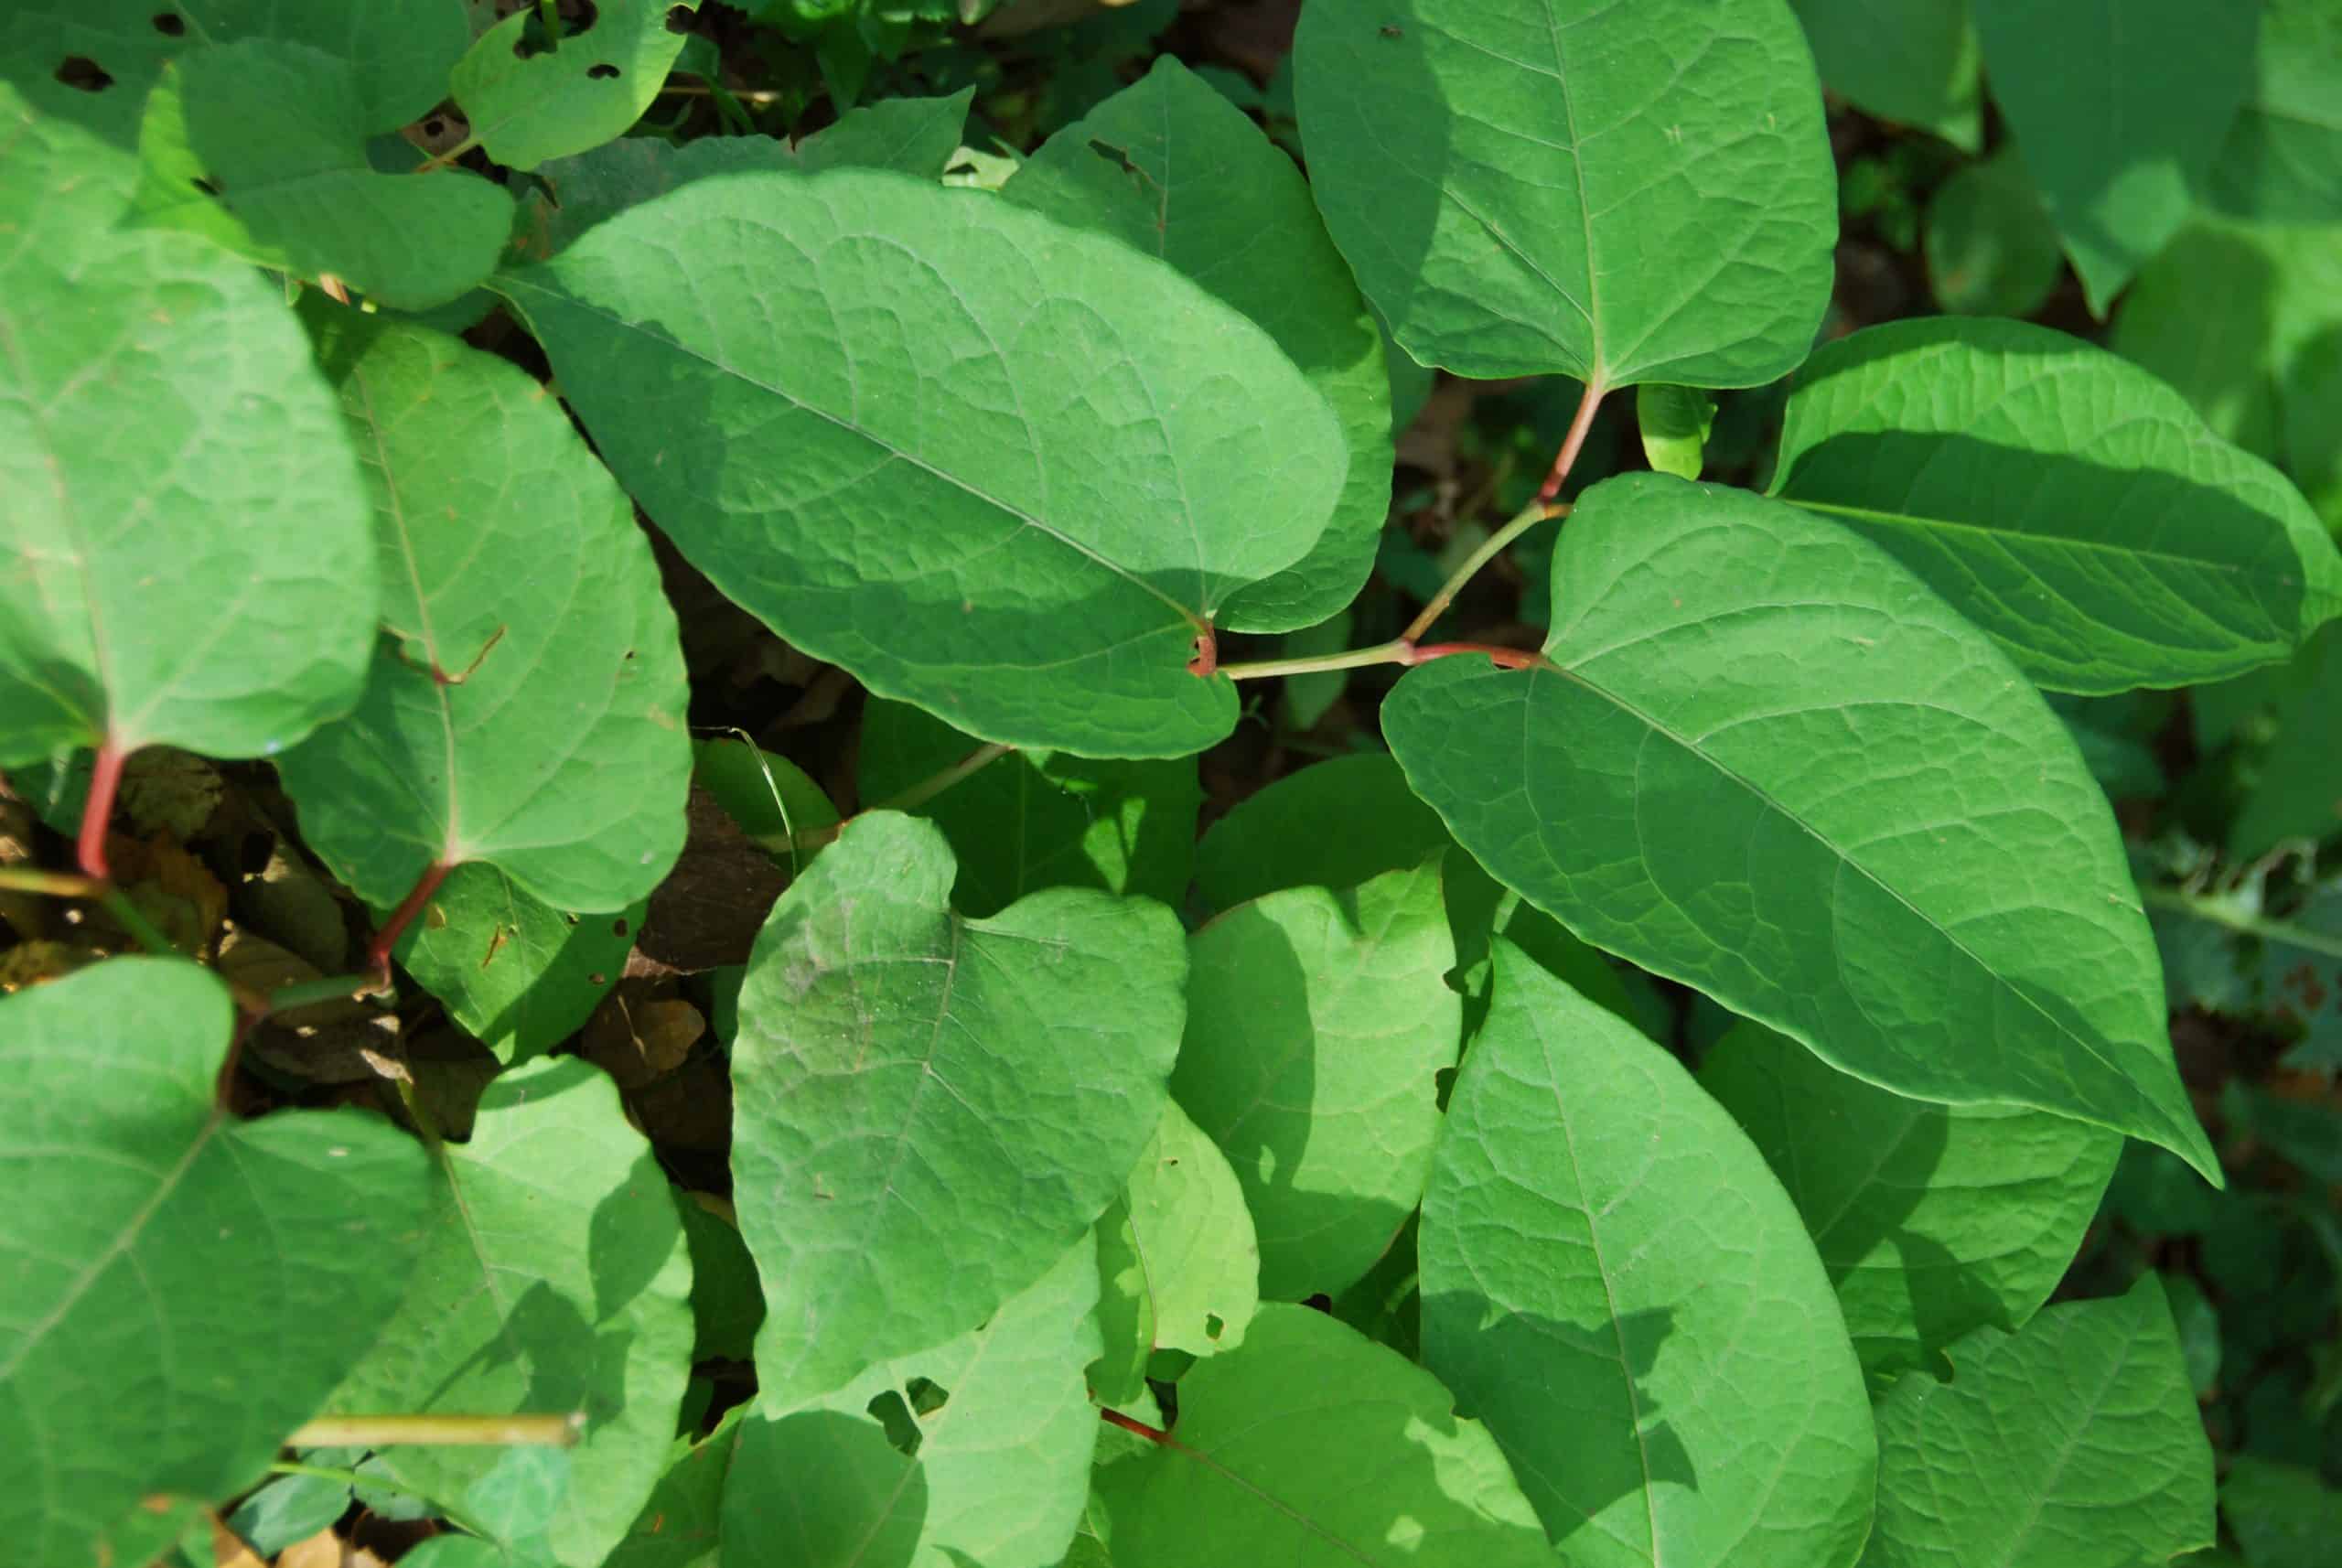 Invasive plant Japanese knotweed is now widespread and near damn impossible to remove